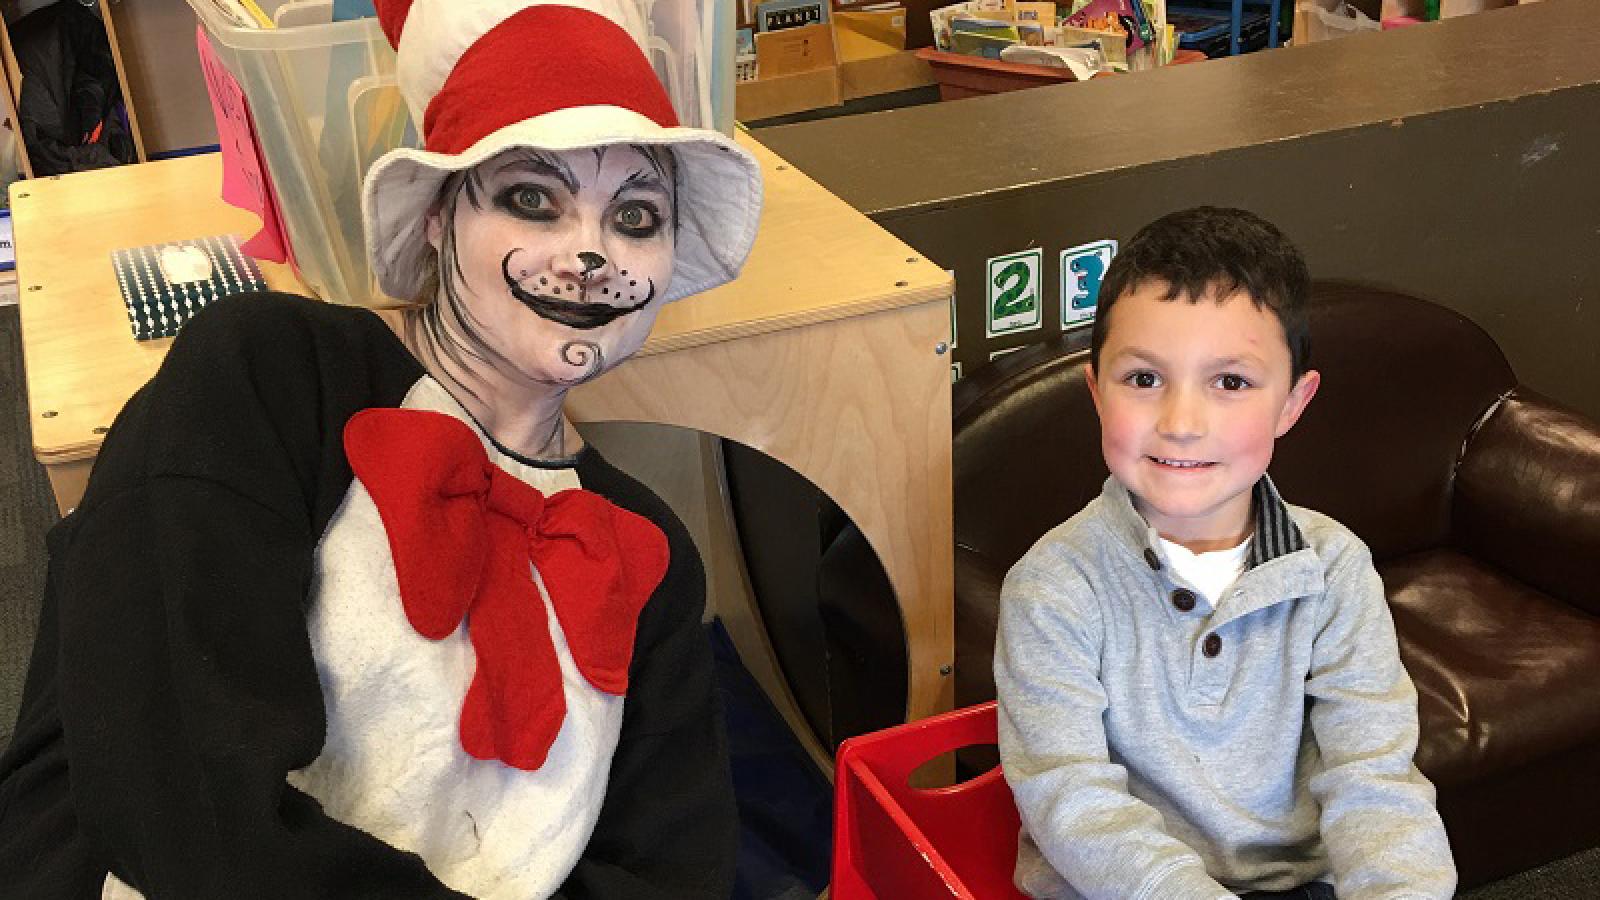 The Cat in the Hat visits with a child.